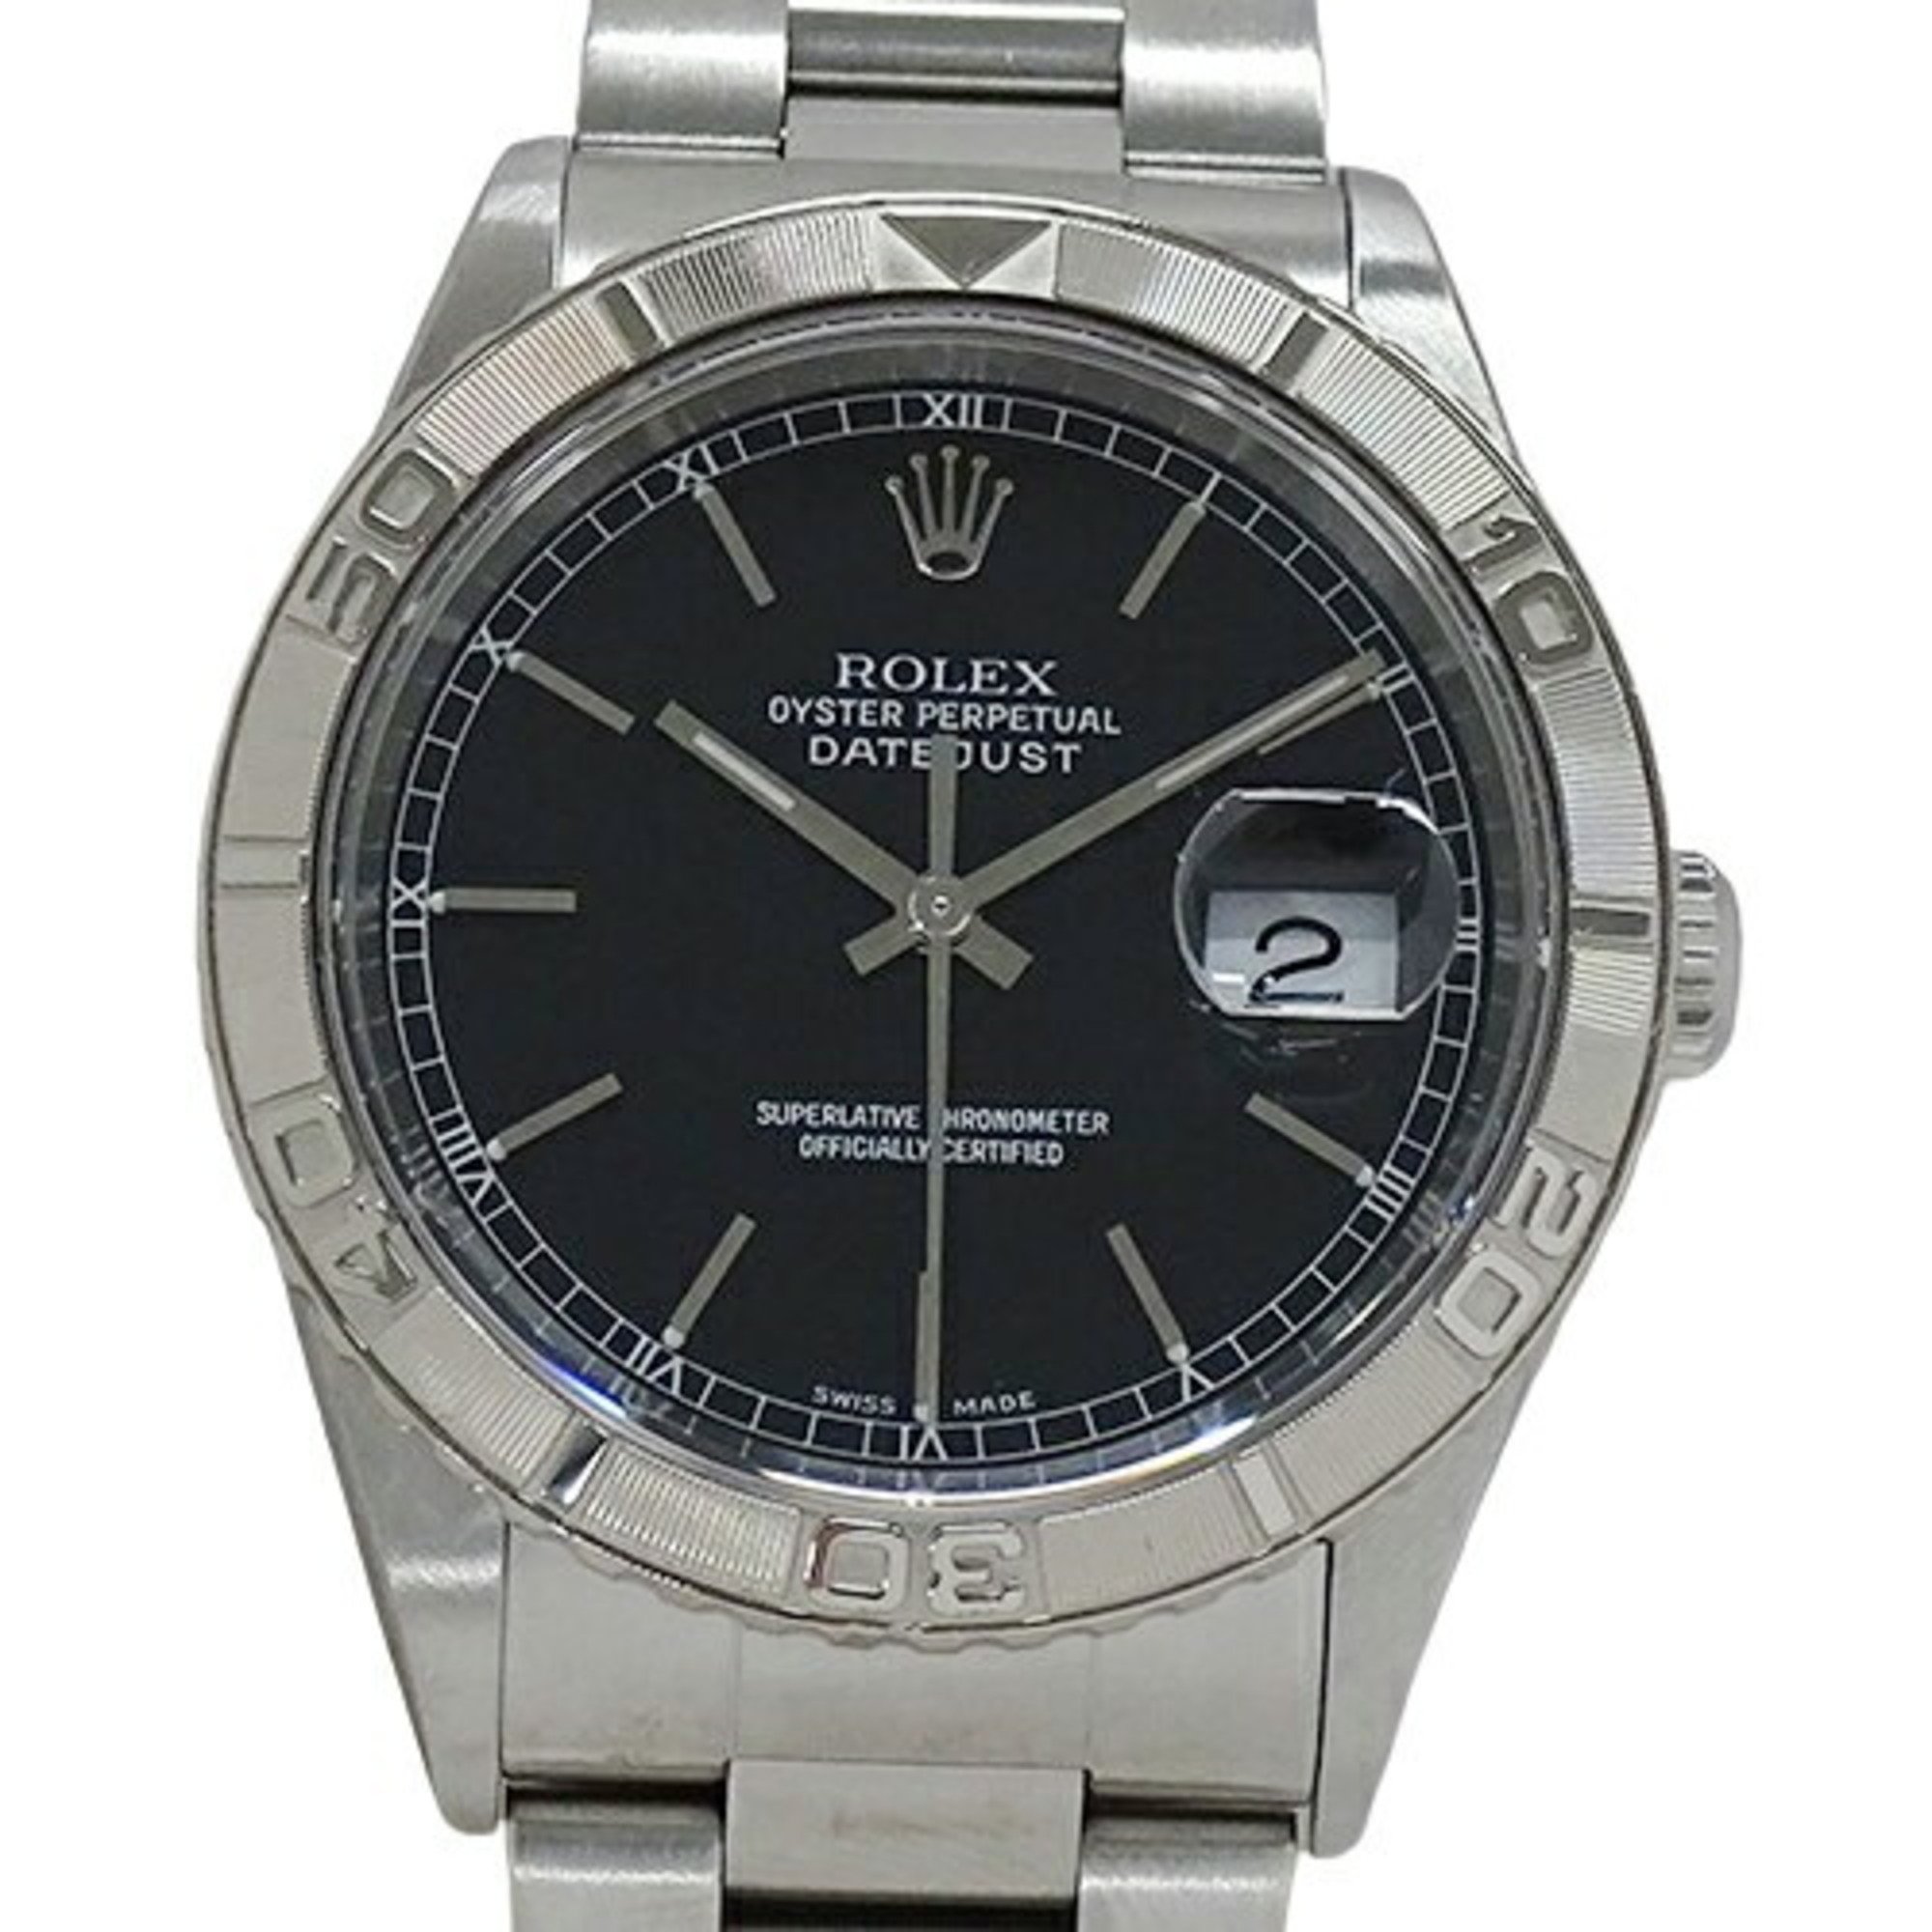 Rolex ROLEX Datejust Thunderbird 16264 Y serial number watch men's automatic AT stainless steel SS white gold WG silver black polished